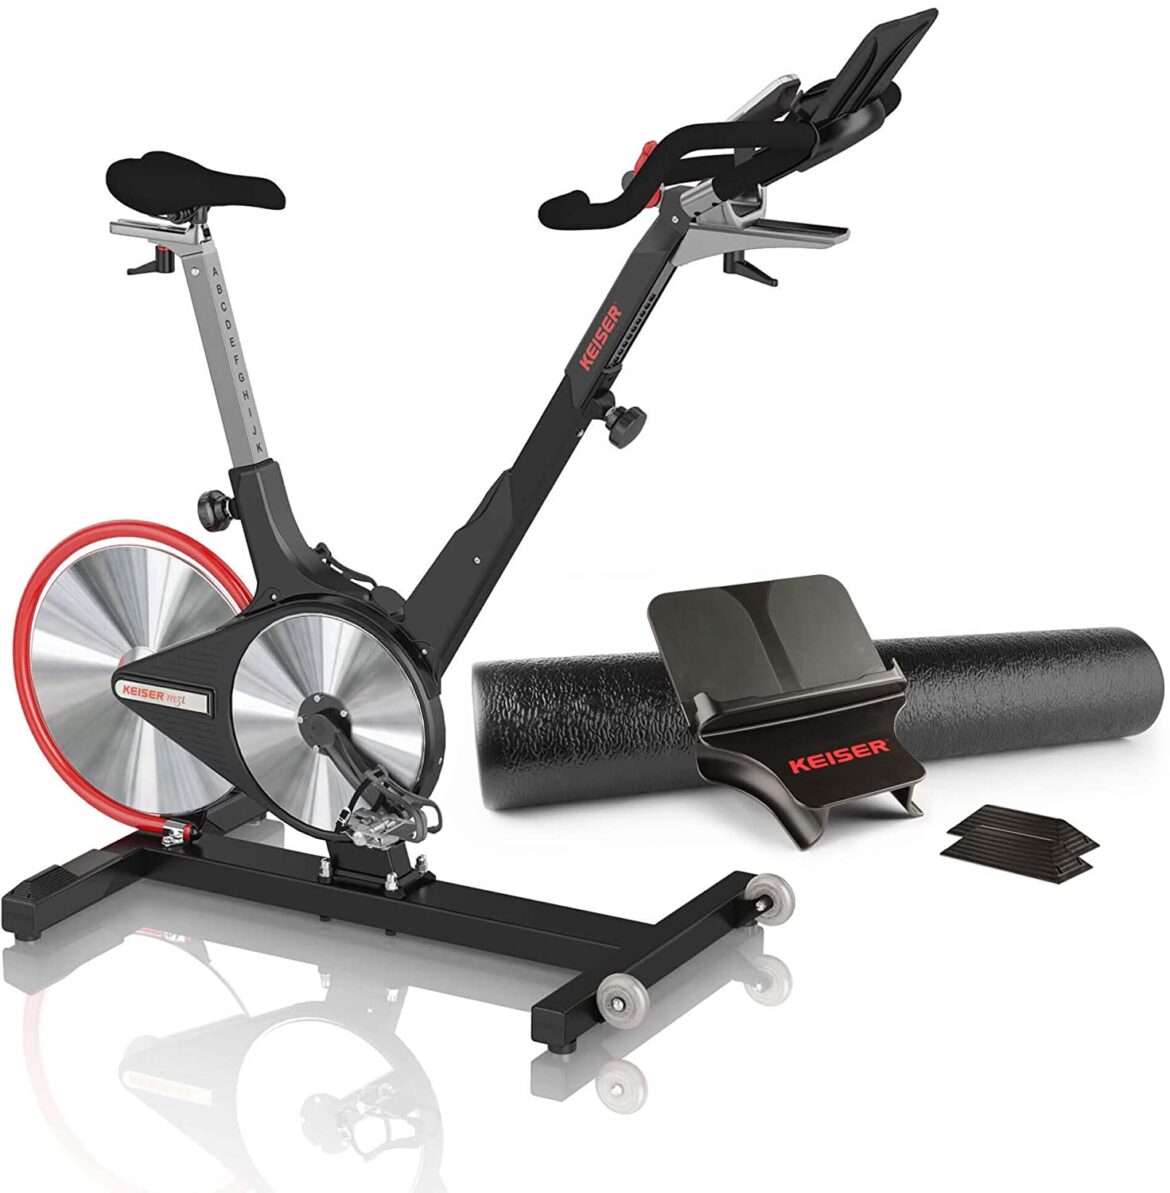 What You Need To Look For When Choosing Your Indoor Cycling Bike